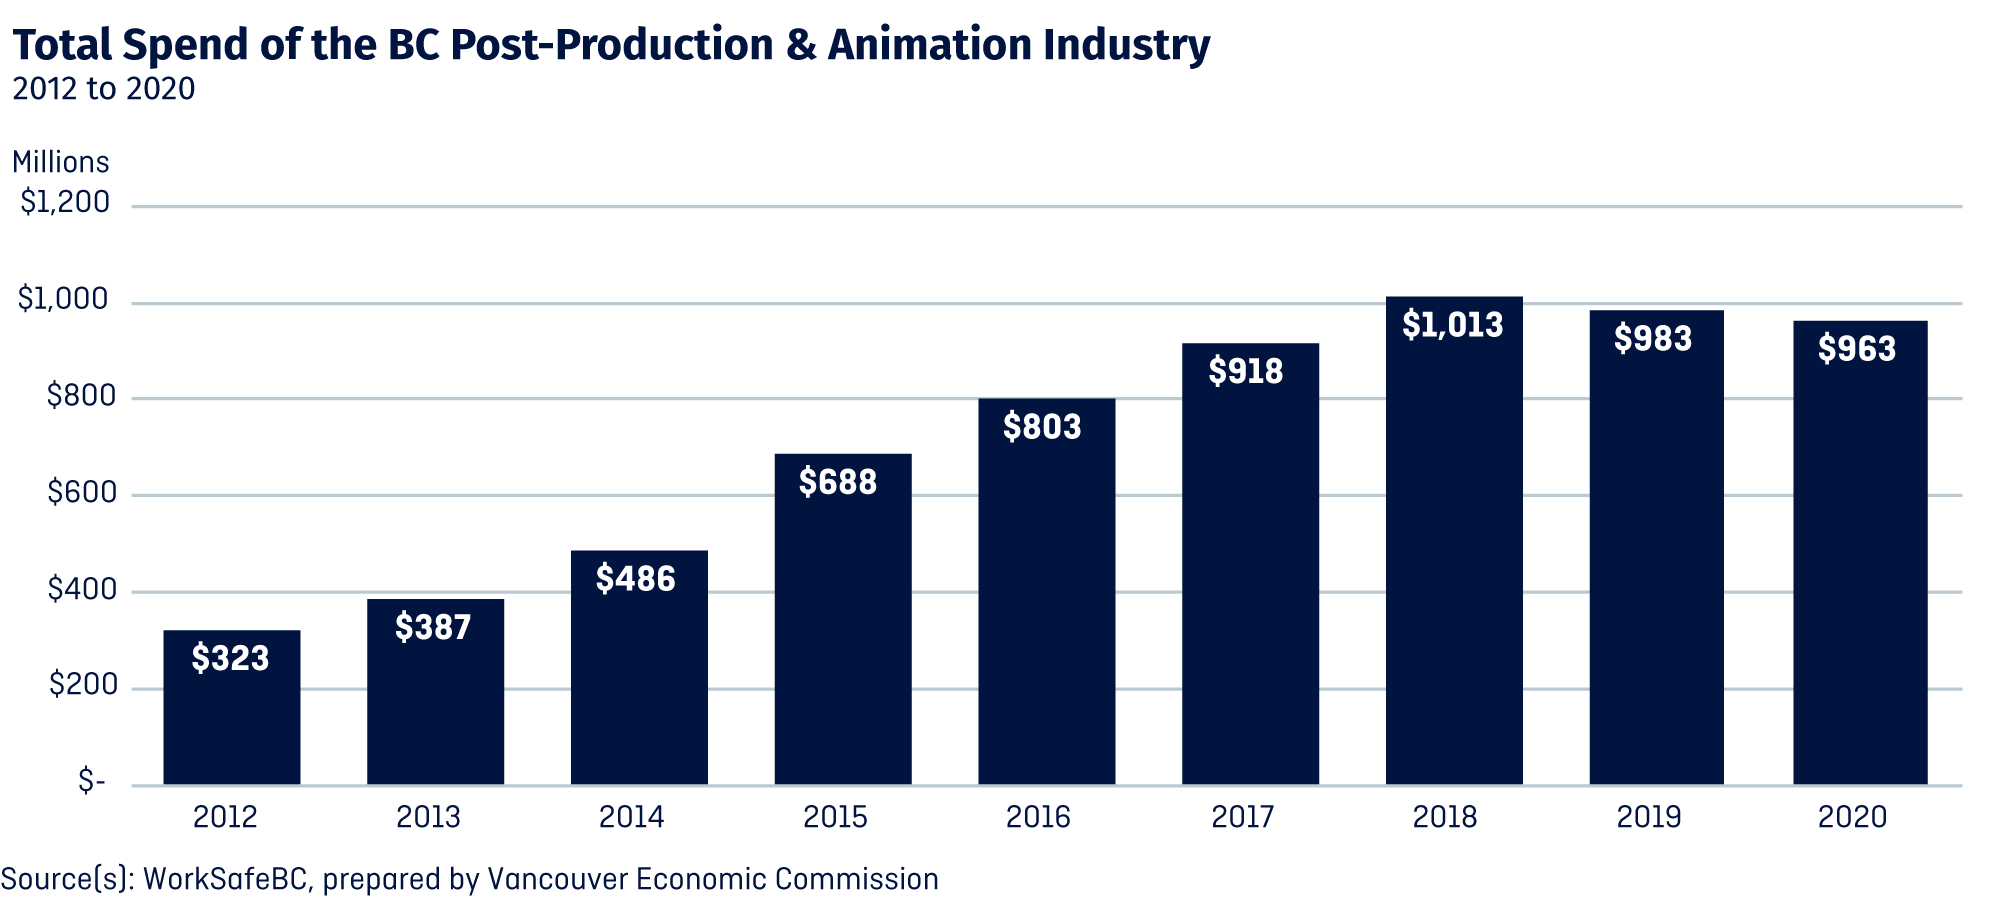 Total Spend of the BC Post-Production & Animation Industry 2012 to 2020